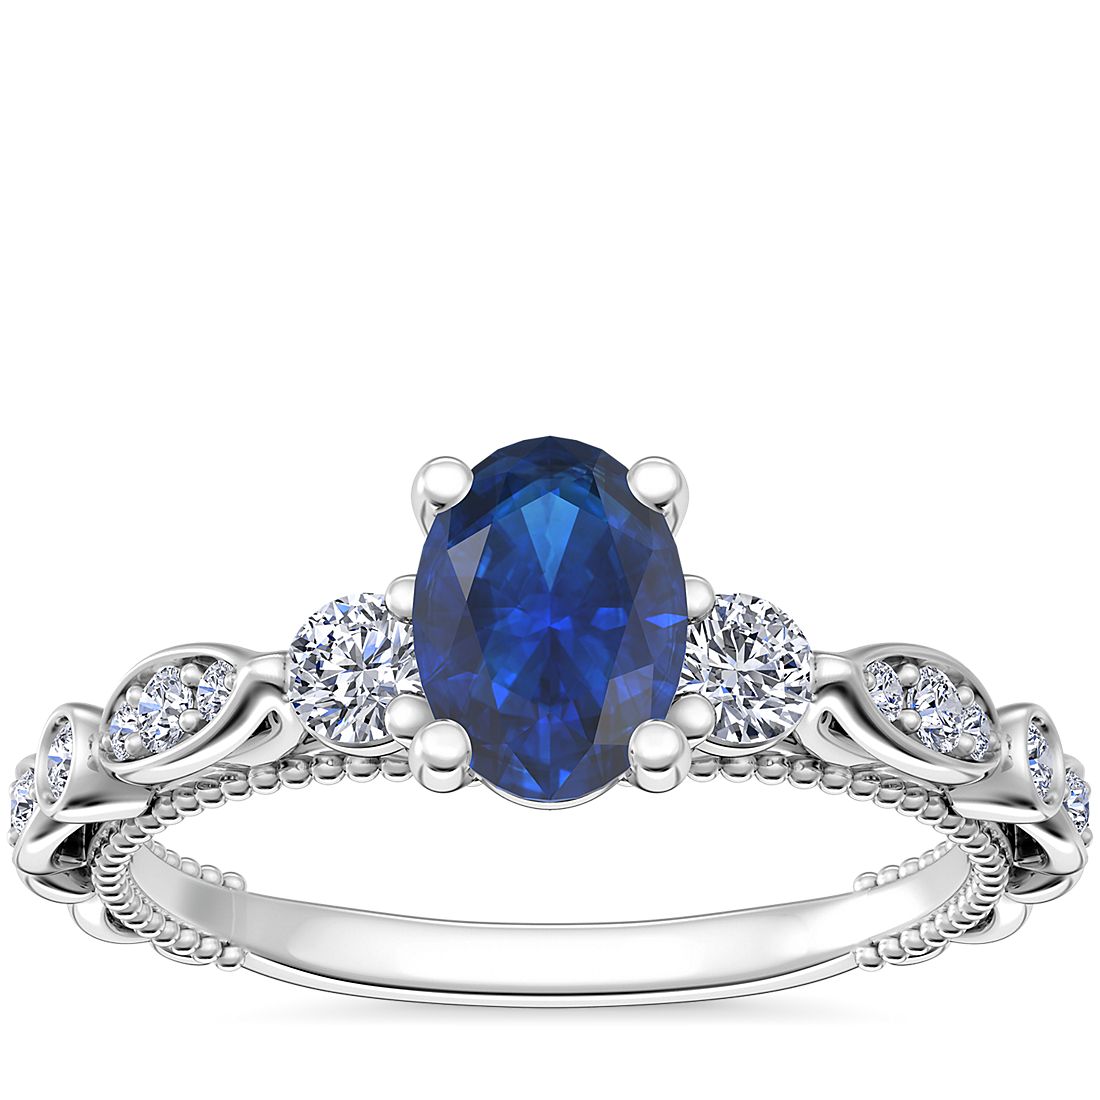 Floral Ellipse Diamond Cathedral Engagement Ring with Oval Sapphire in 14k White Gold (7x5mm)